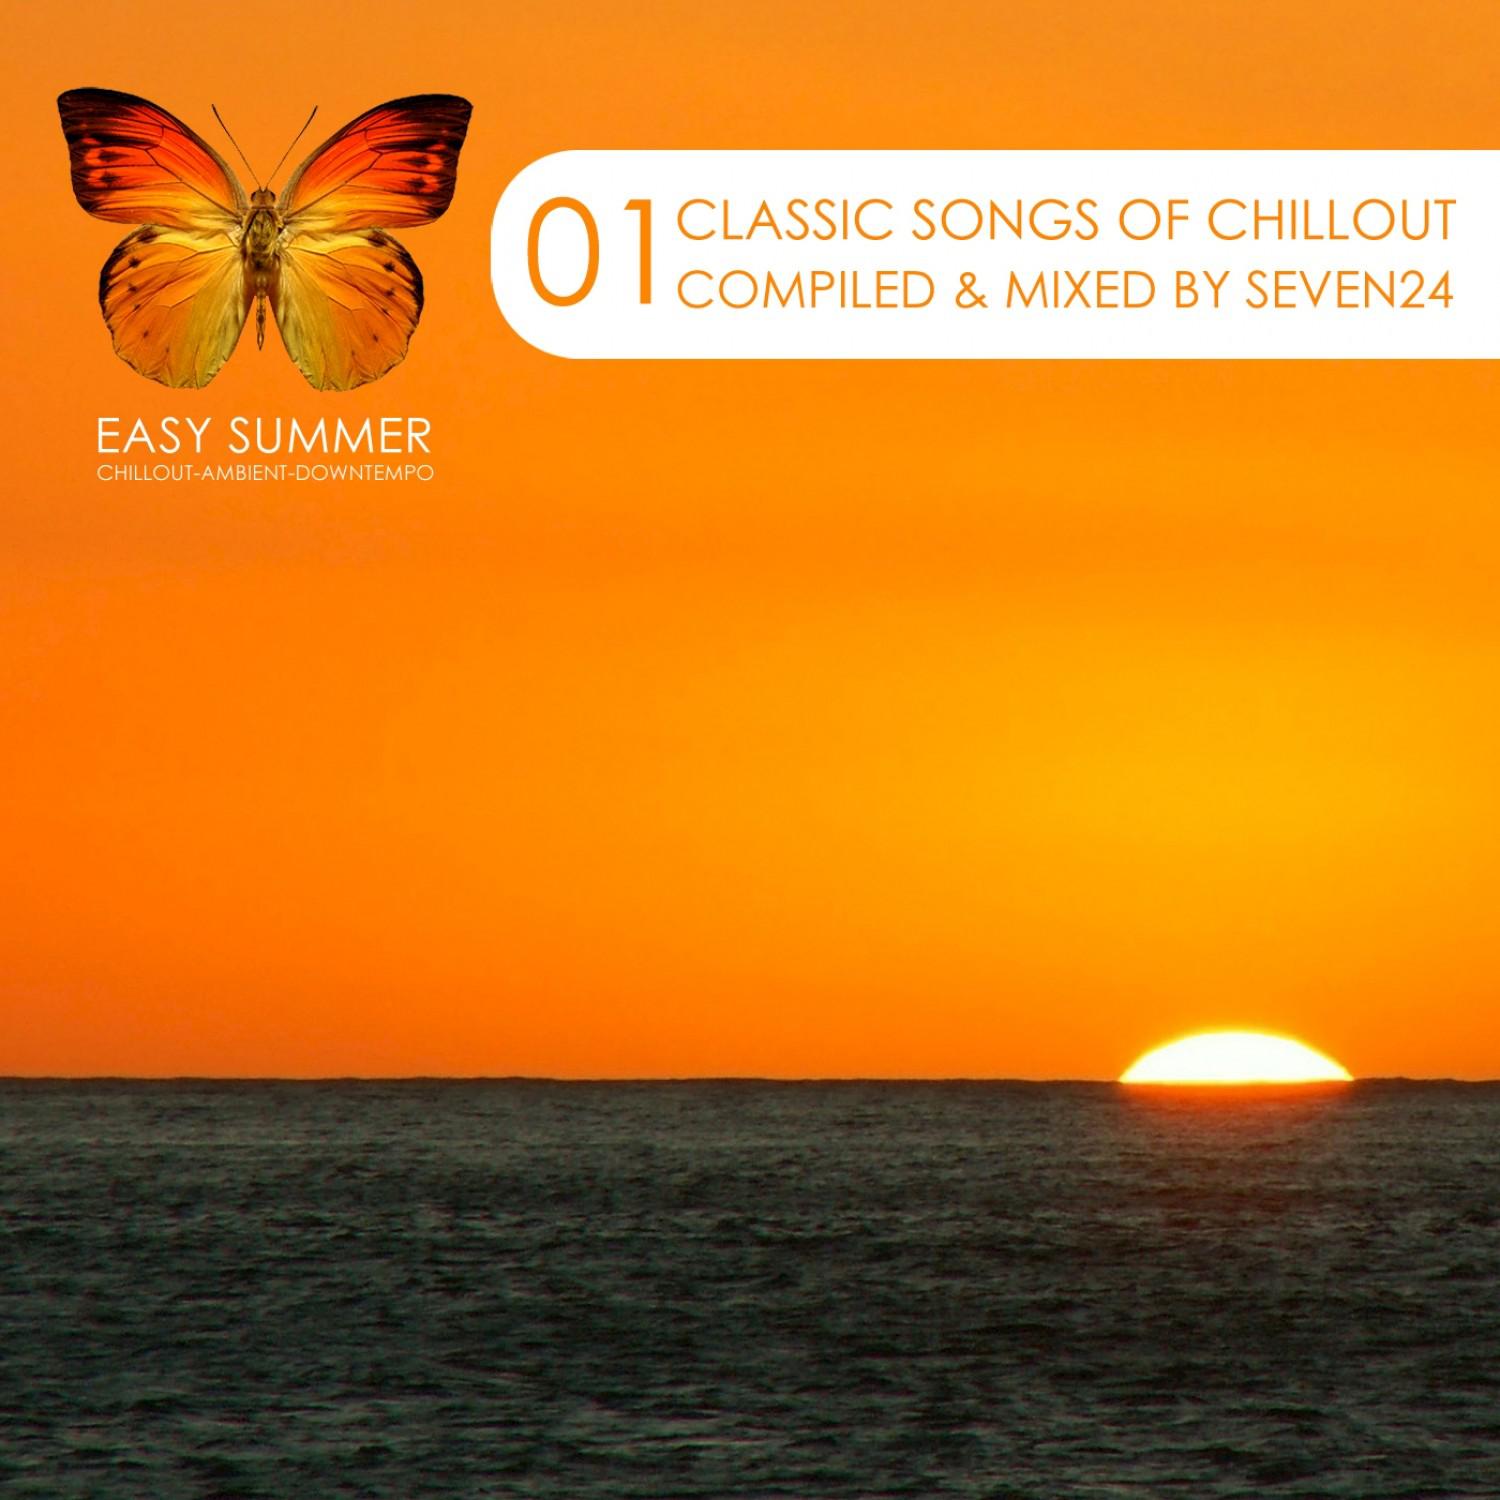 Classic Songs of Chillout 01 (Compiled by Seven24)